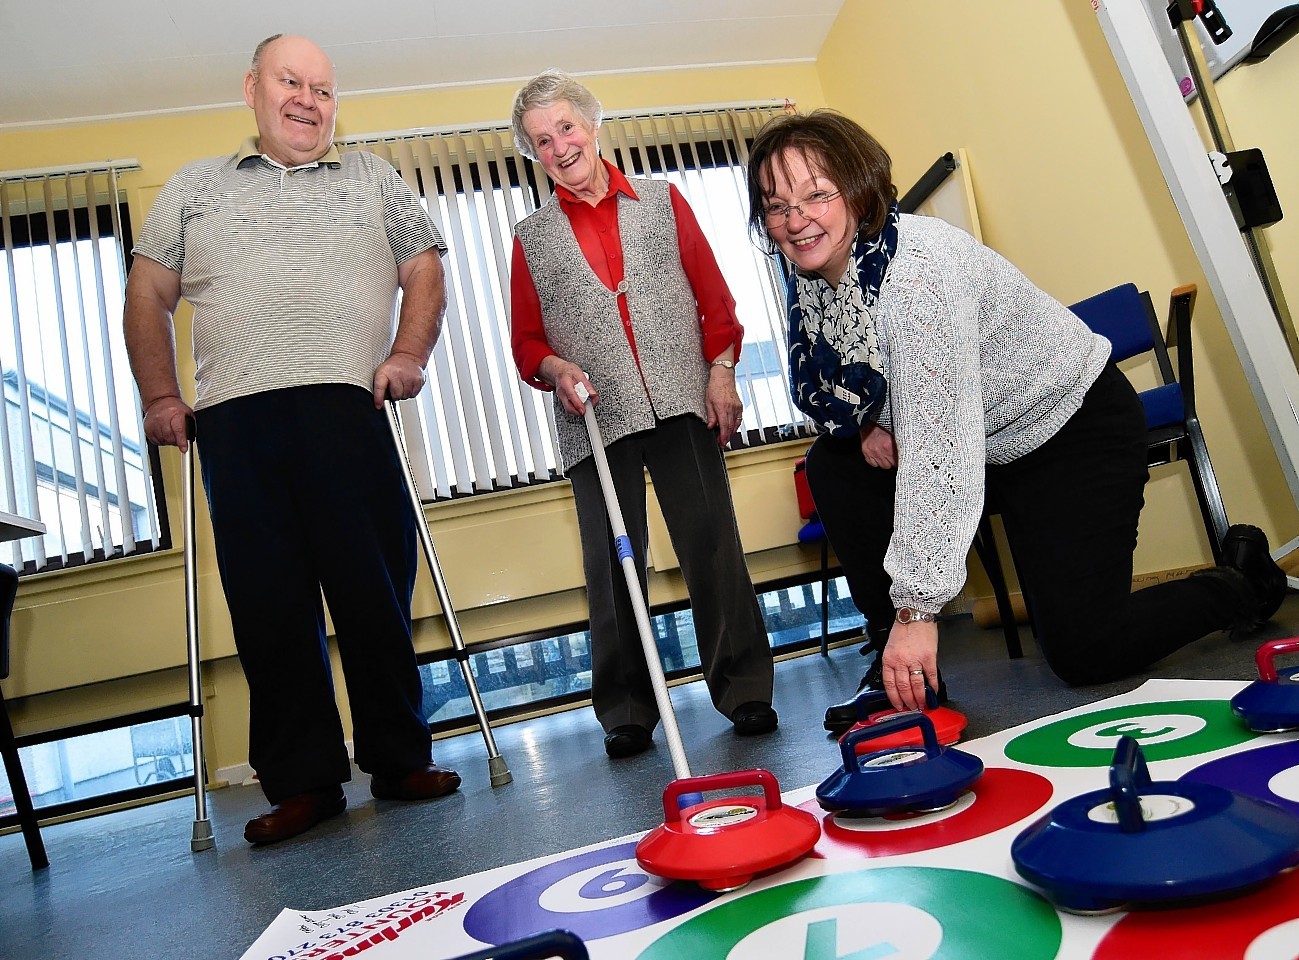 MEMBERS OF THE CHEST HEART AND STROKE SUPPORT GROUP PLAYING NEW AGE KURLING AT THEIR WEEKLY MEETING (L TO R) JOHN  NEISH, AGNES GAIRNS AND SUPPORT WORKER CAROLINE PETER.